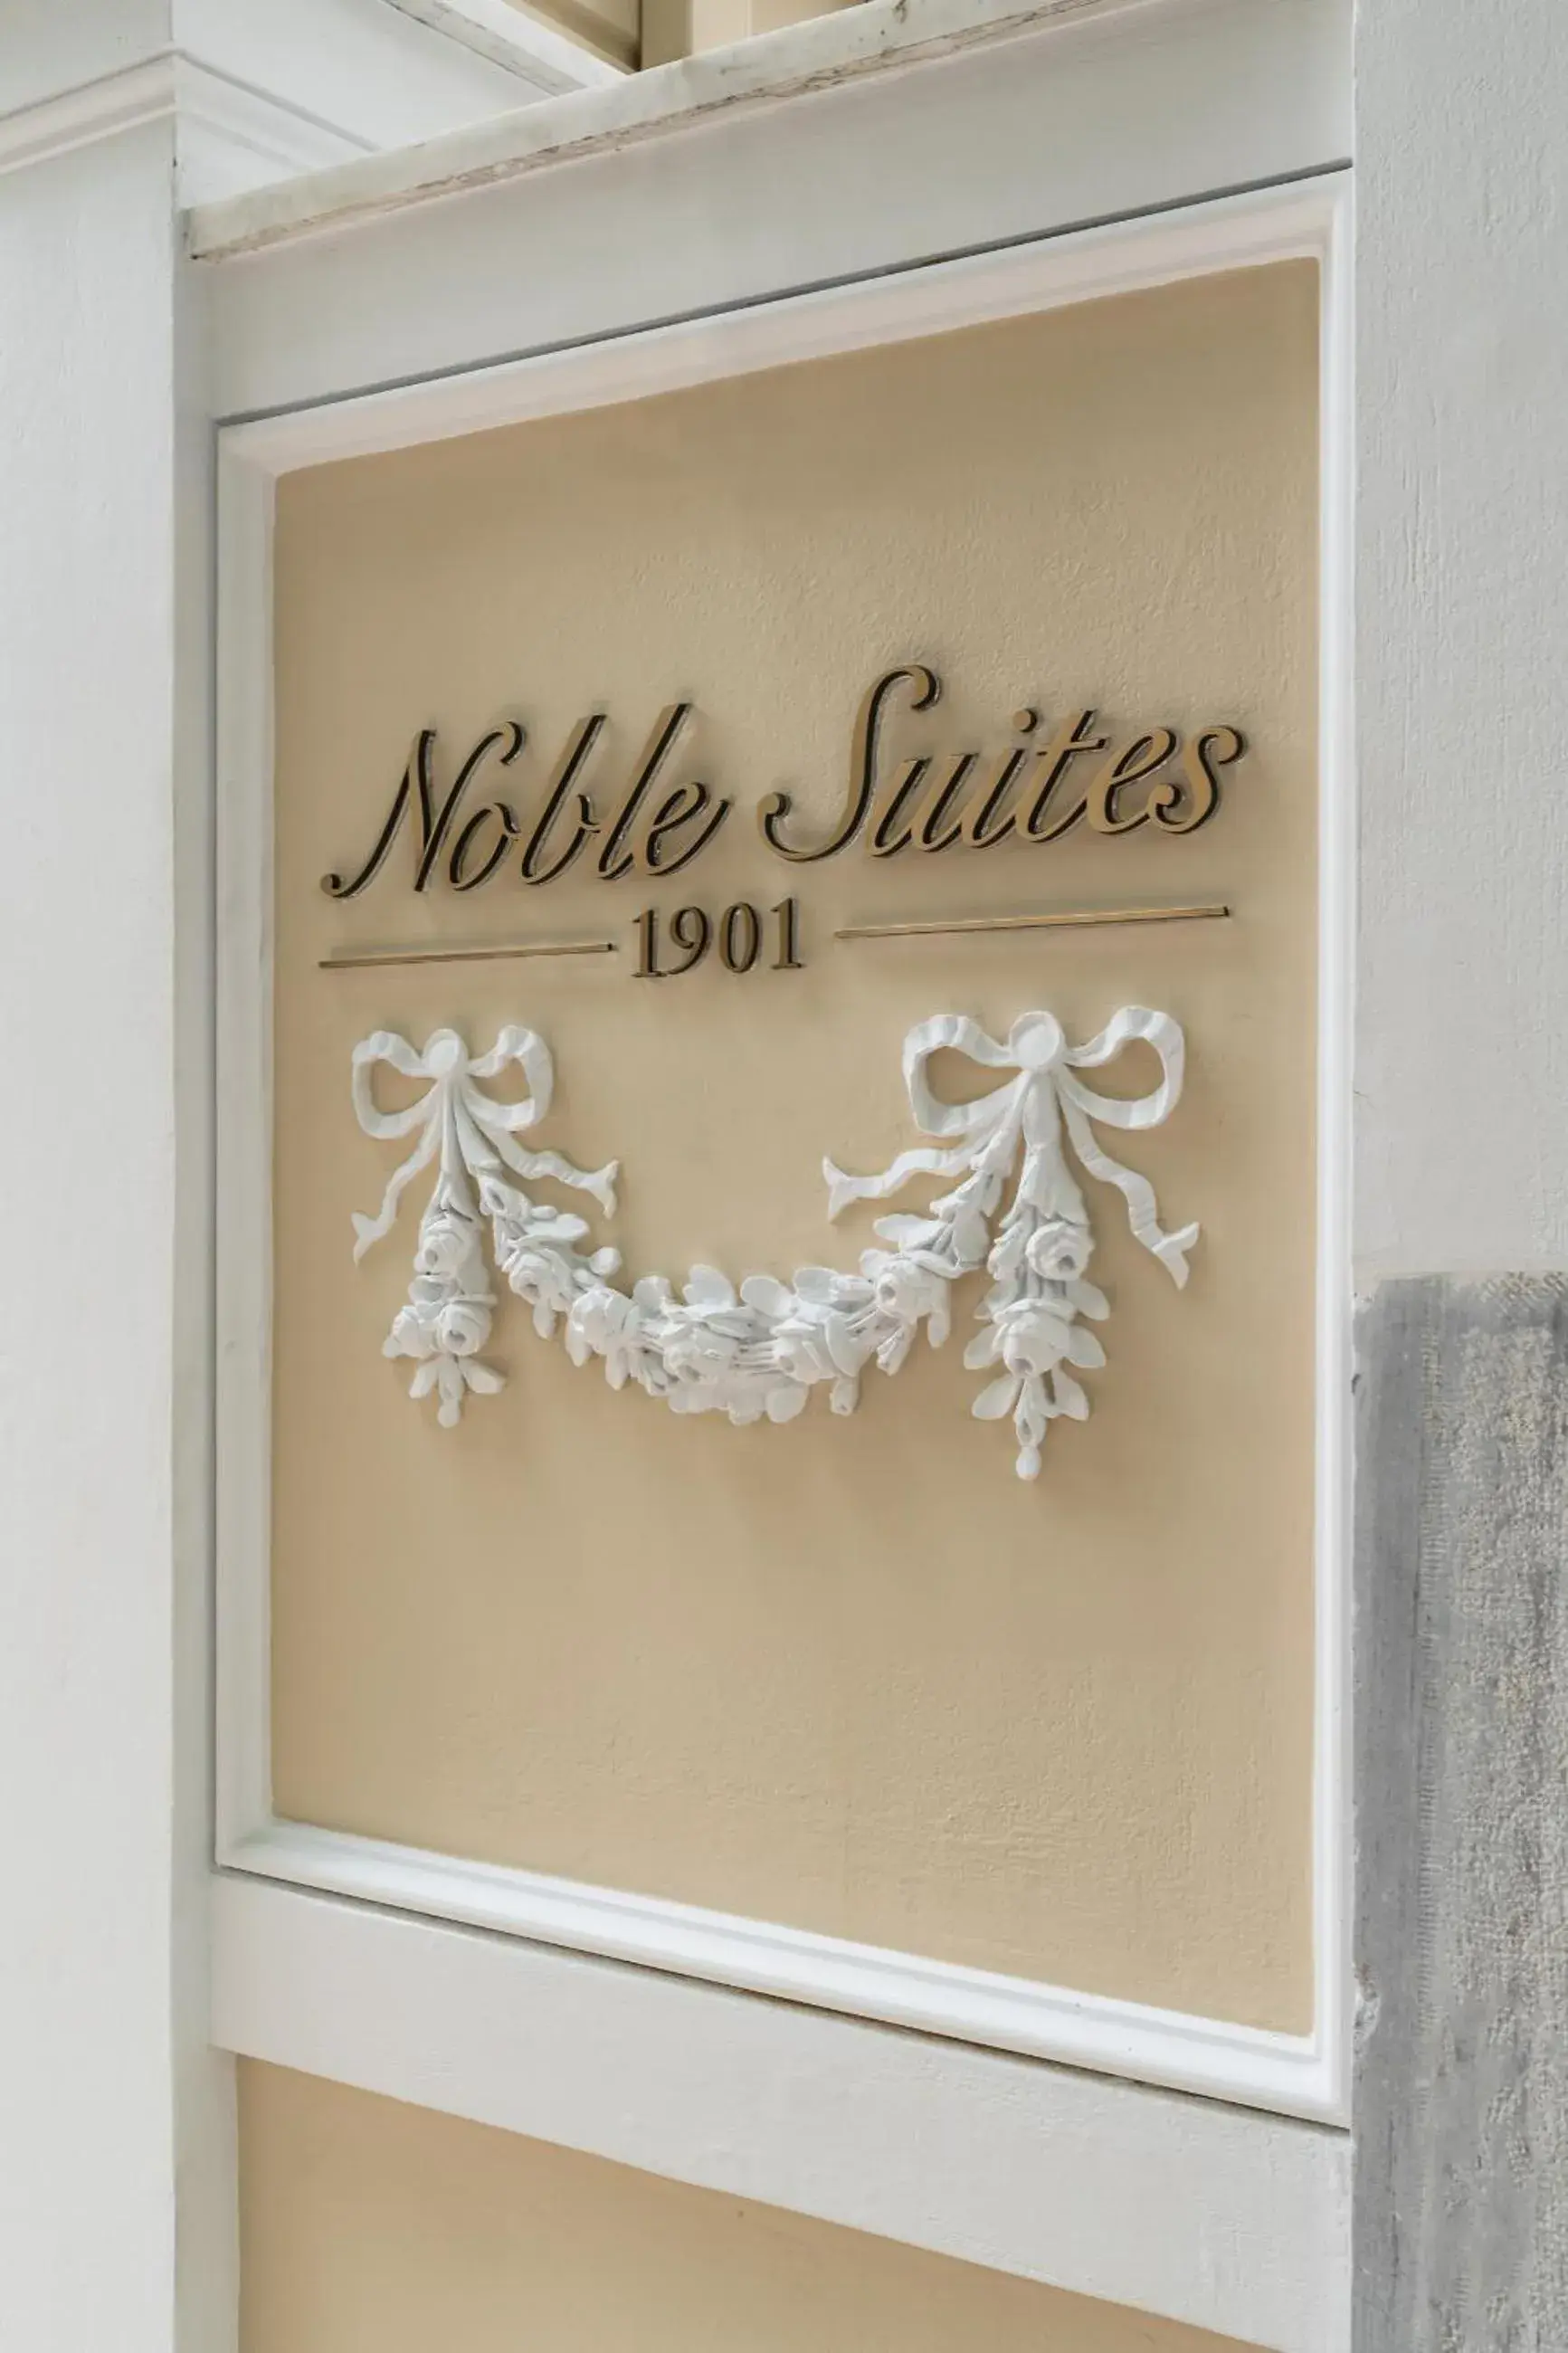 Property logo or sign in Noble Suites